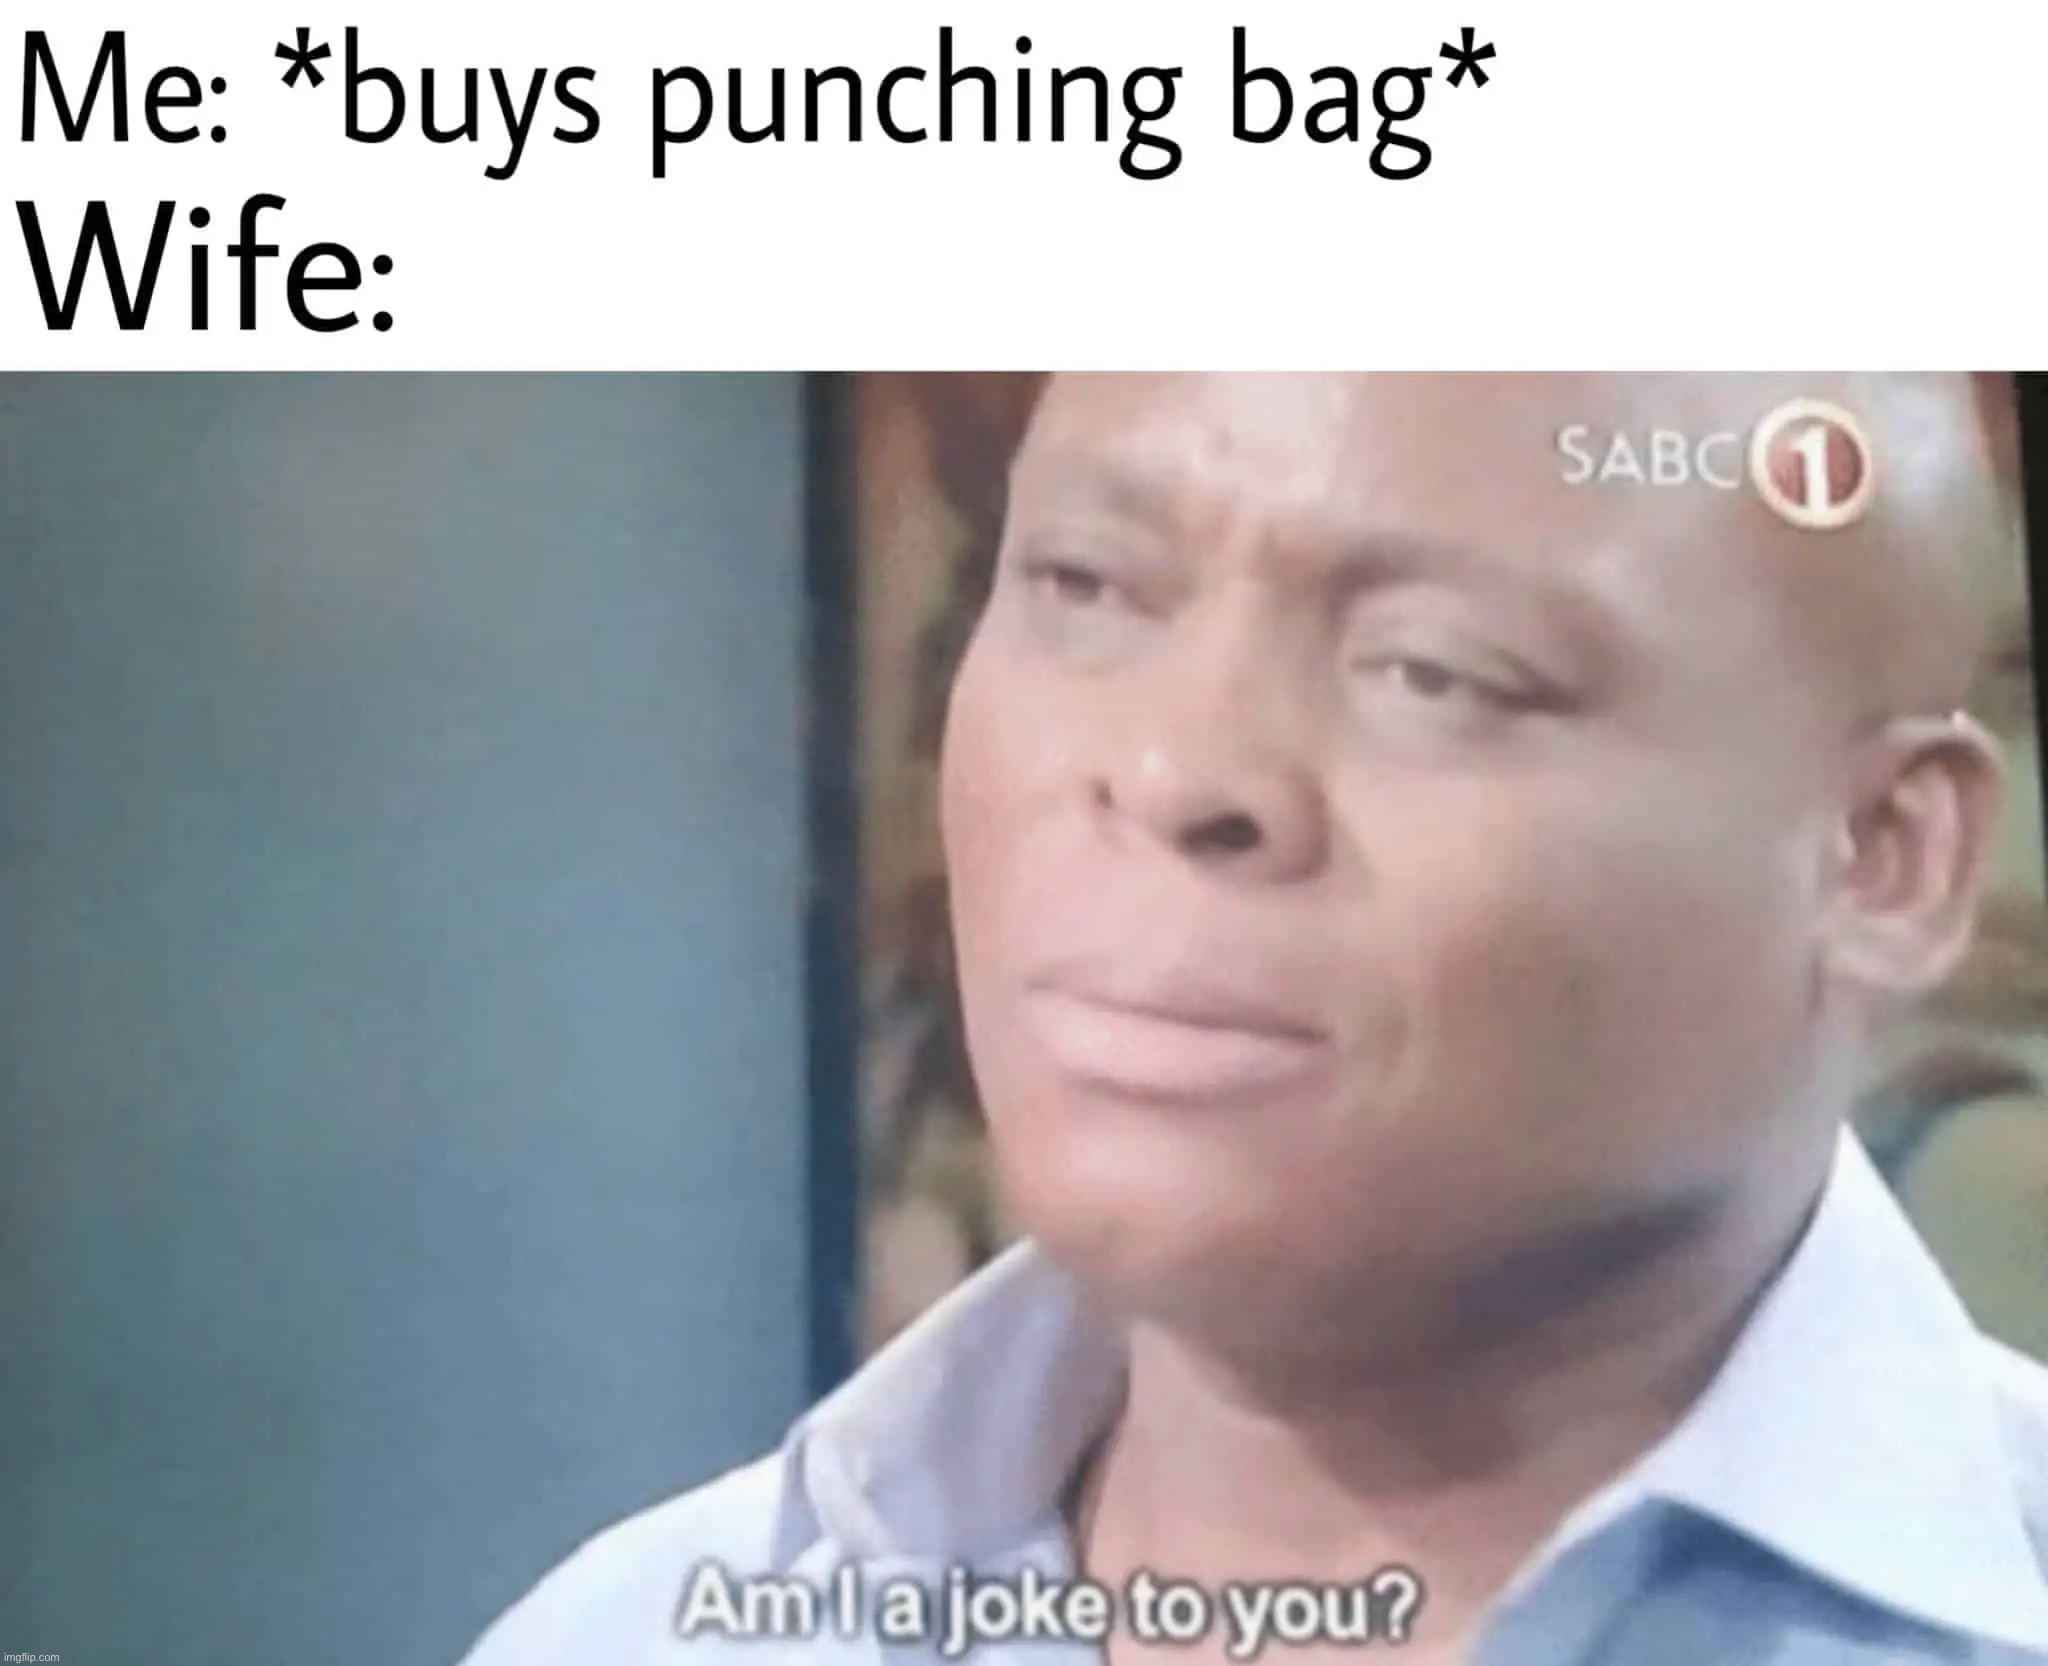 Am I a joke to you? | image tagged in memes,funny,dark humor,lmao,oop,lol | made w/ Imgflip meme maker